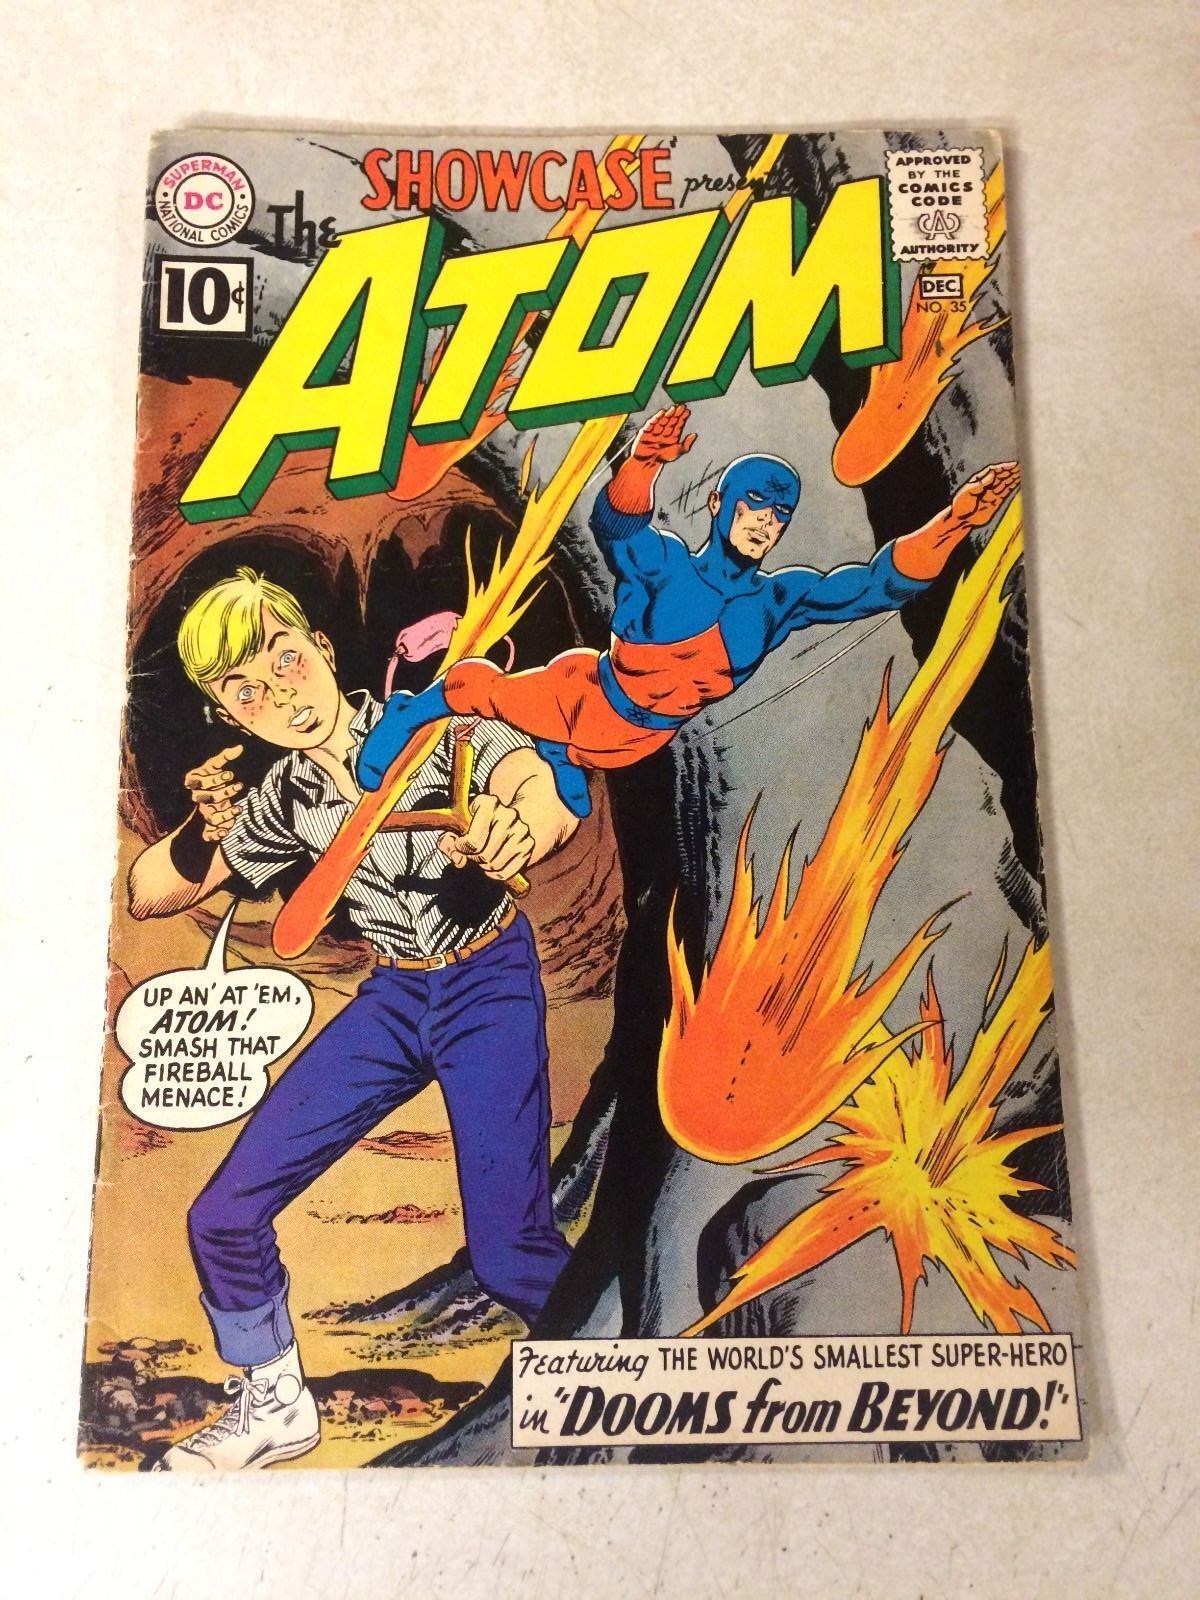 SHOWCASE #35 early ATOM, KEY ISSUE, 2ND APPEARANCE, 1961 SMALLEST SUPERHERO, DC